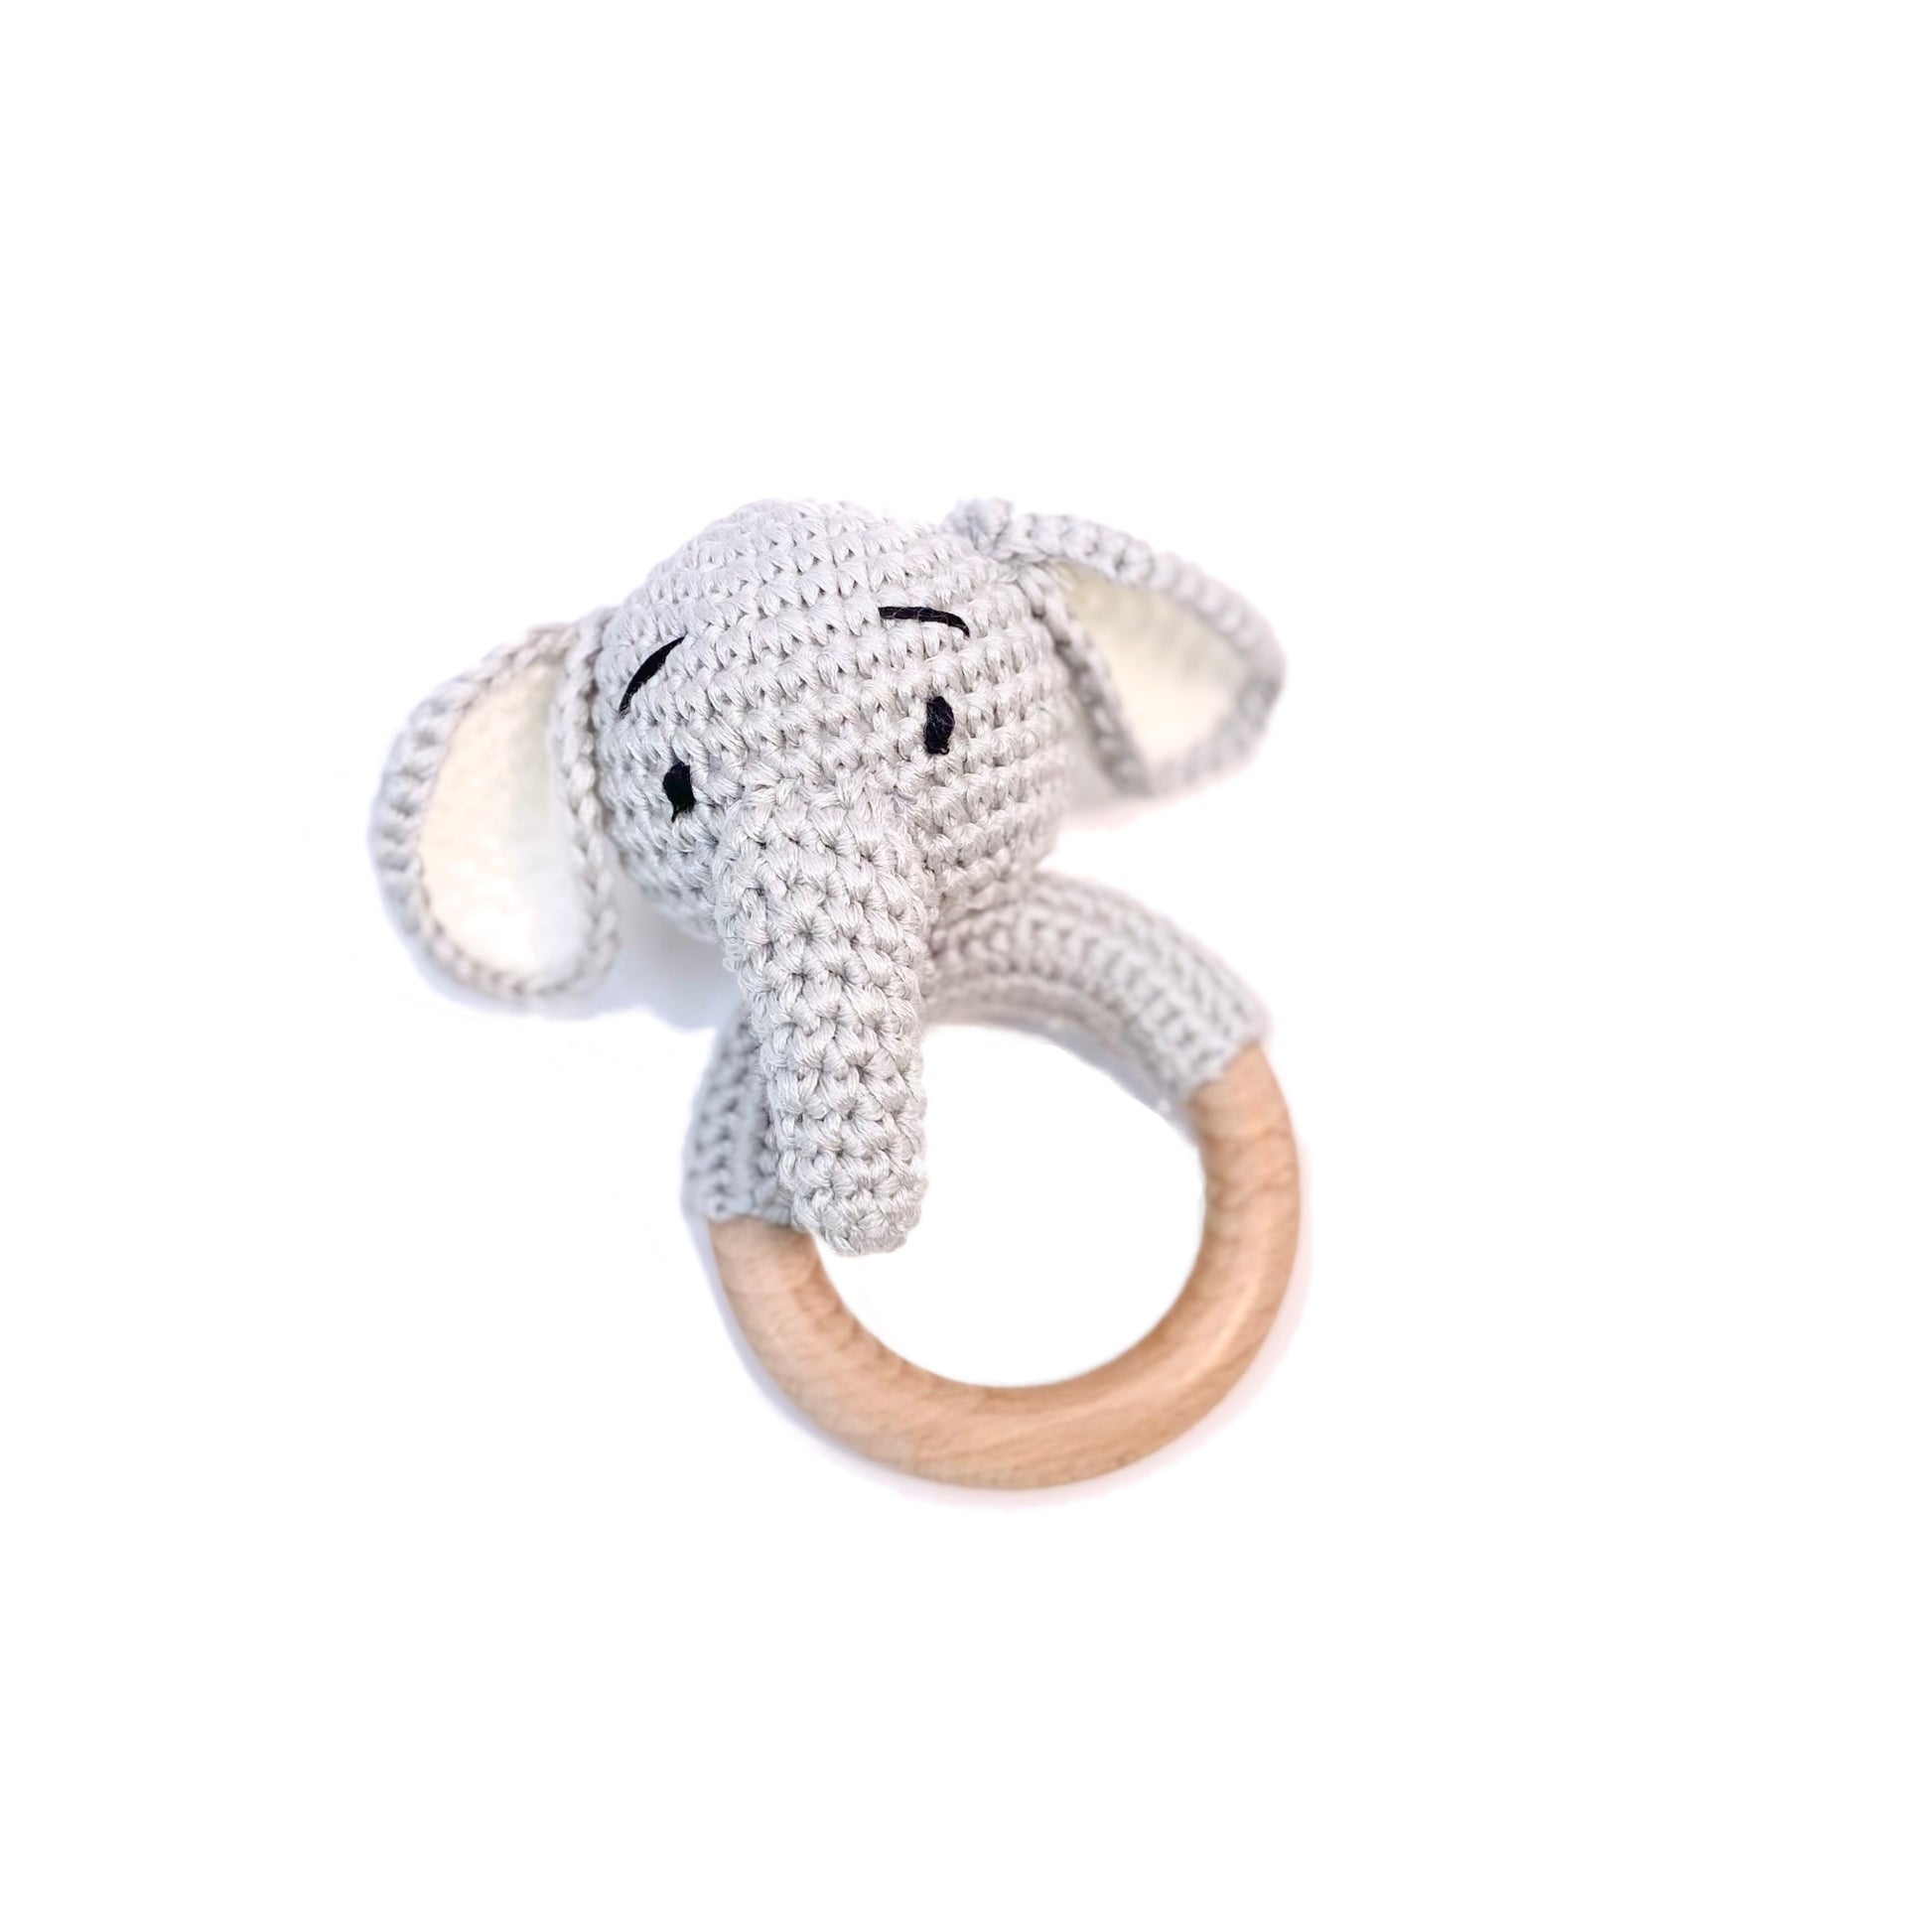 Baby rattle in an elephant design, made from wool and bamboo.